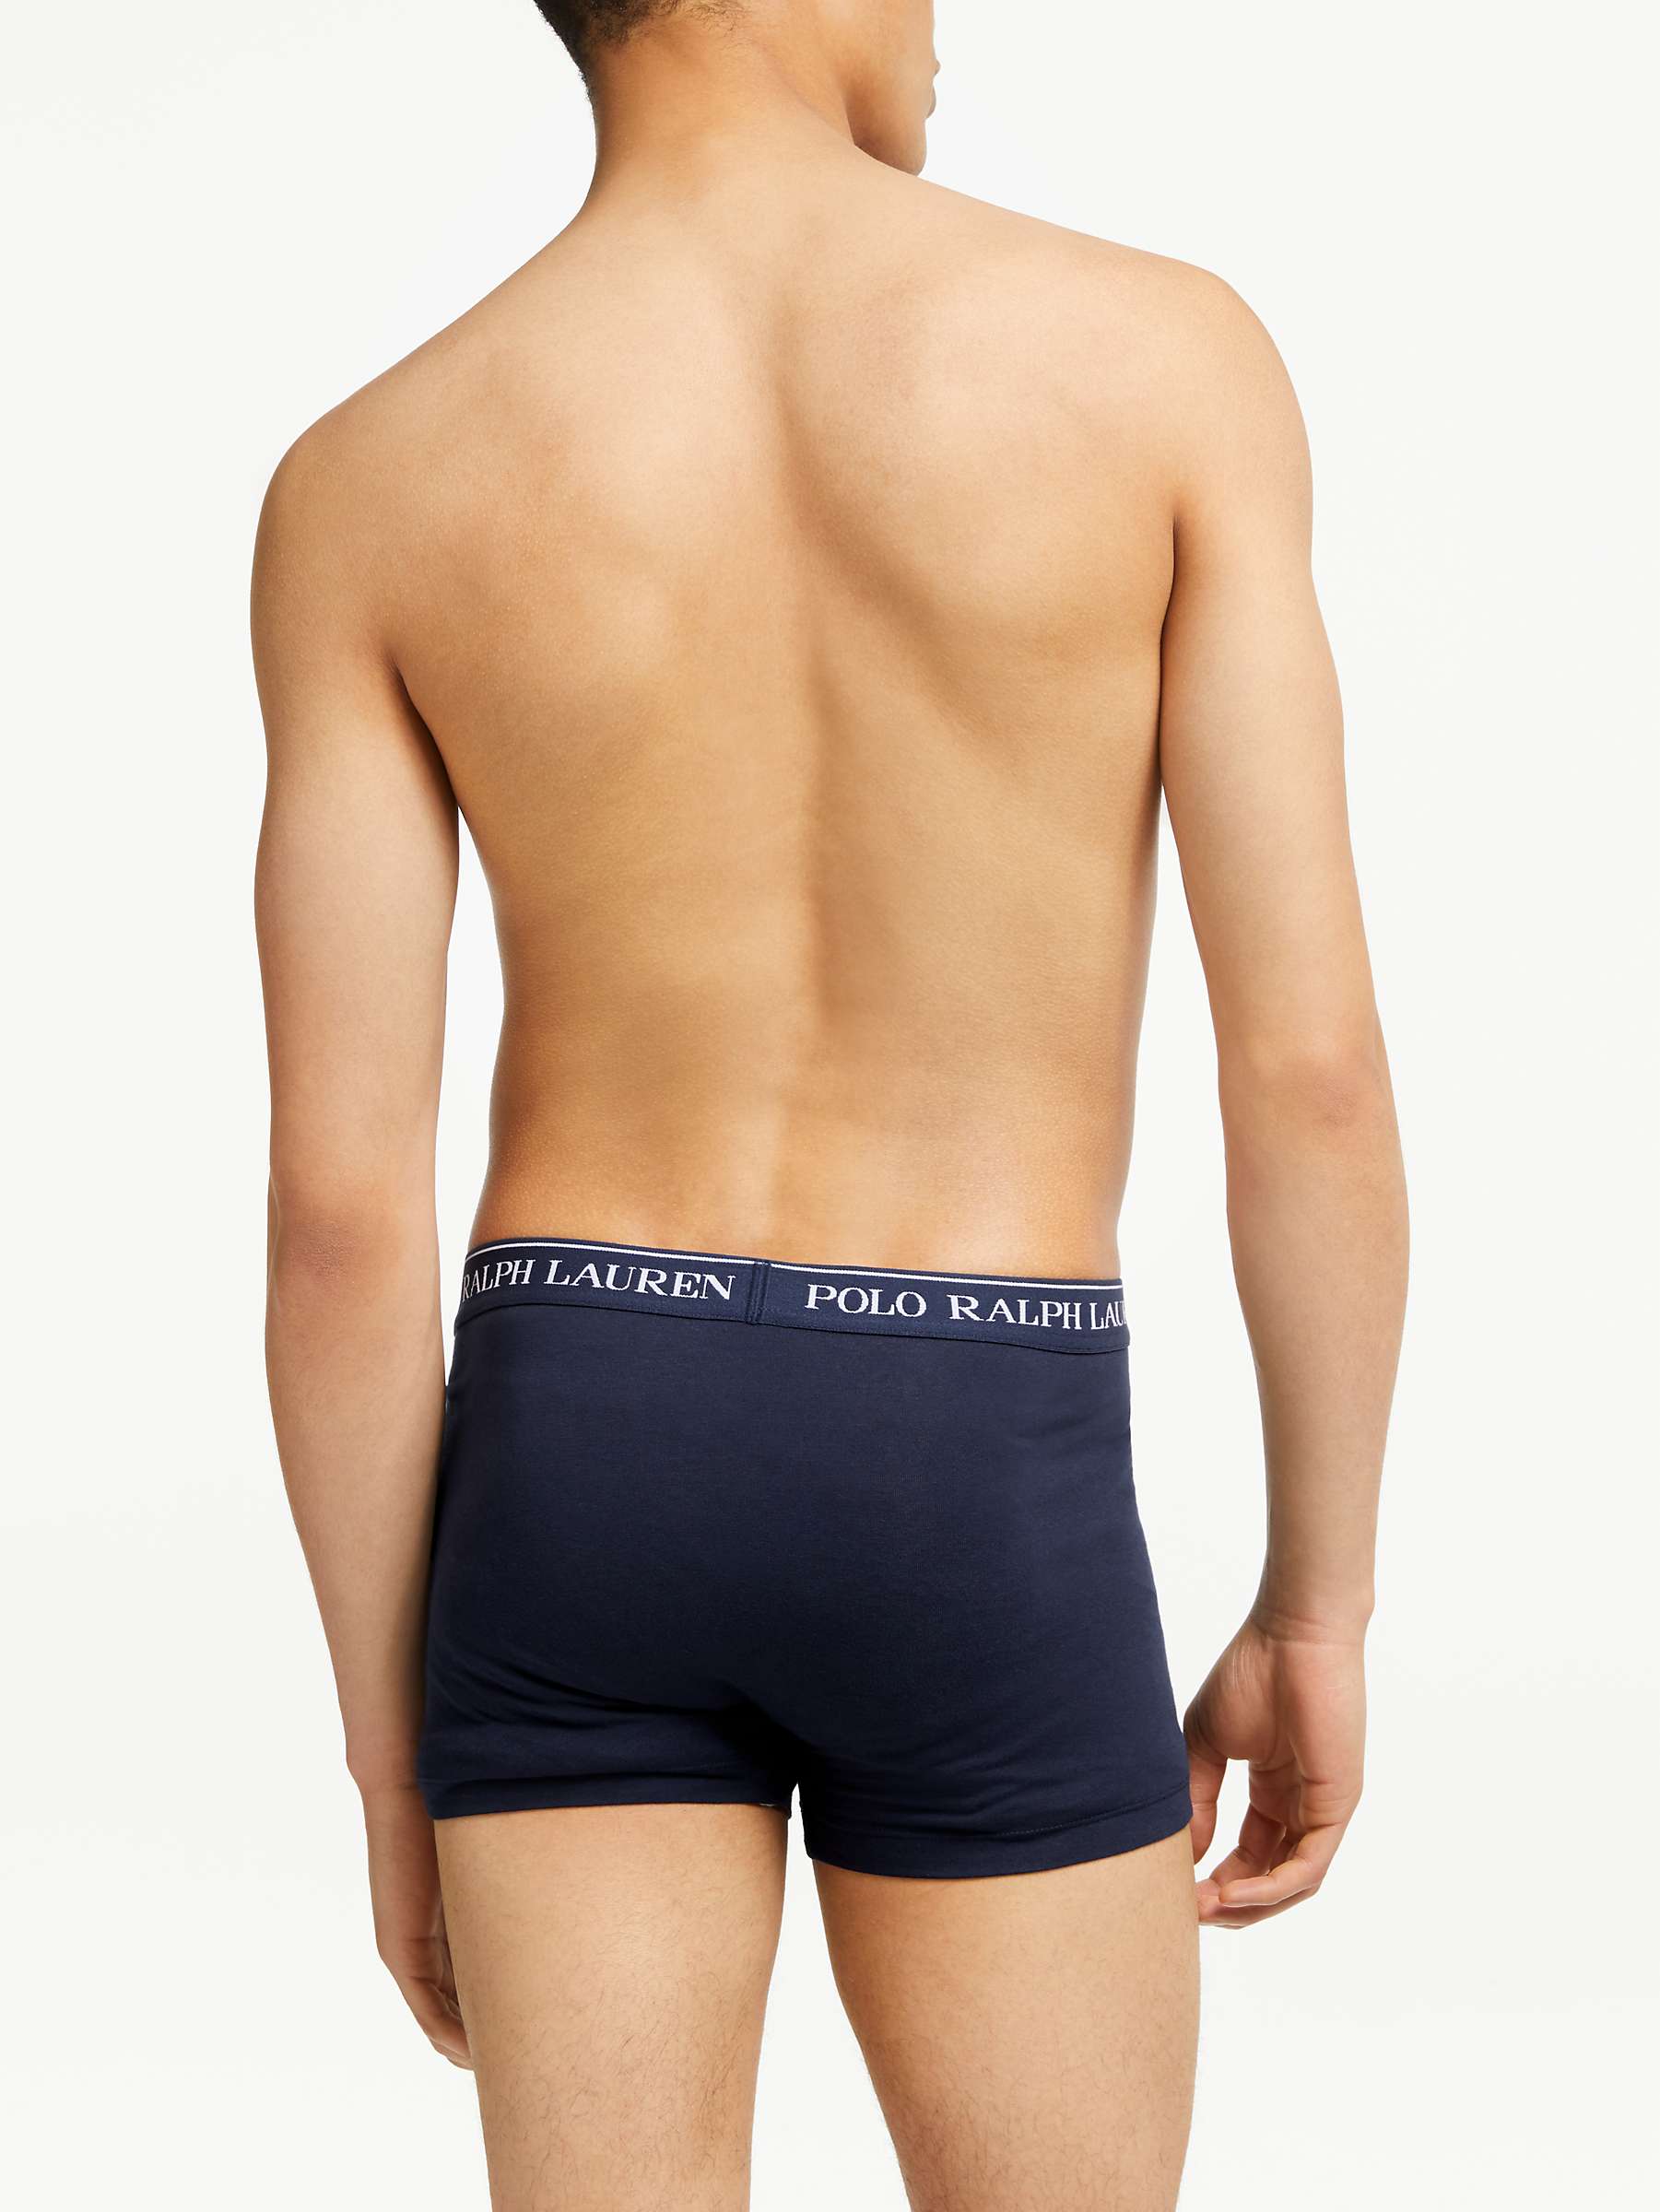 Buy Polo Ralph Lauren Stretch Cotton Trunks, Pack of 3, Blue/Red/White Online at johnlewis.com